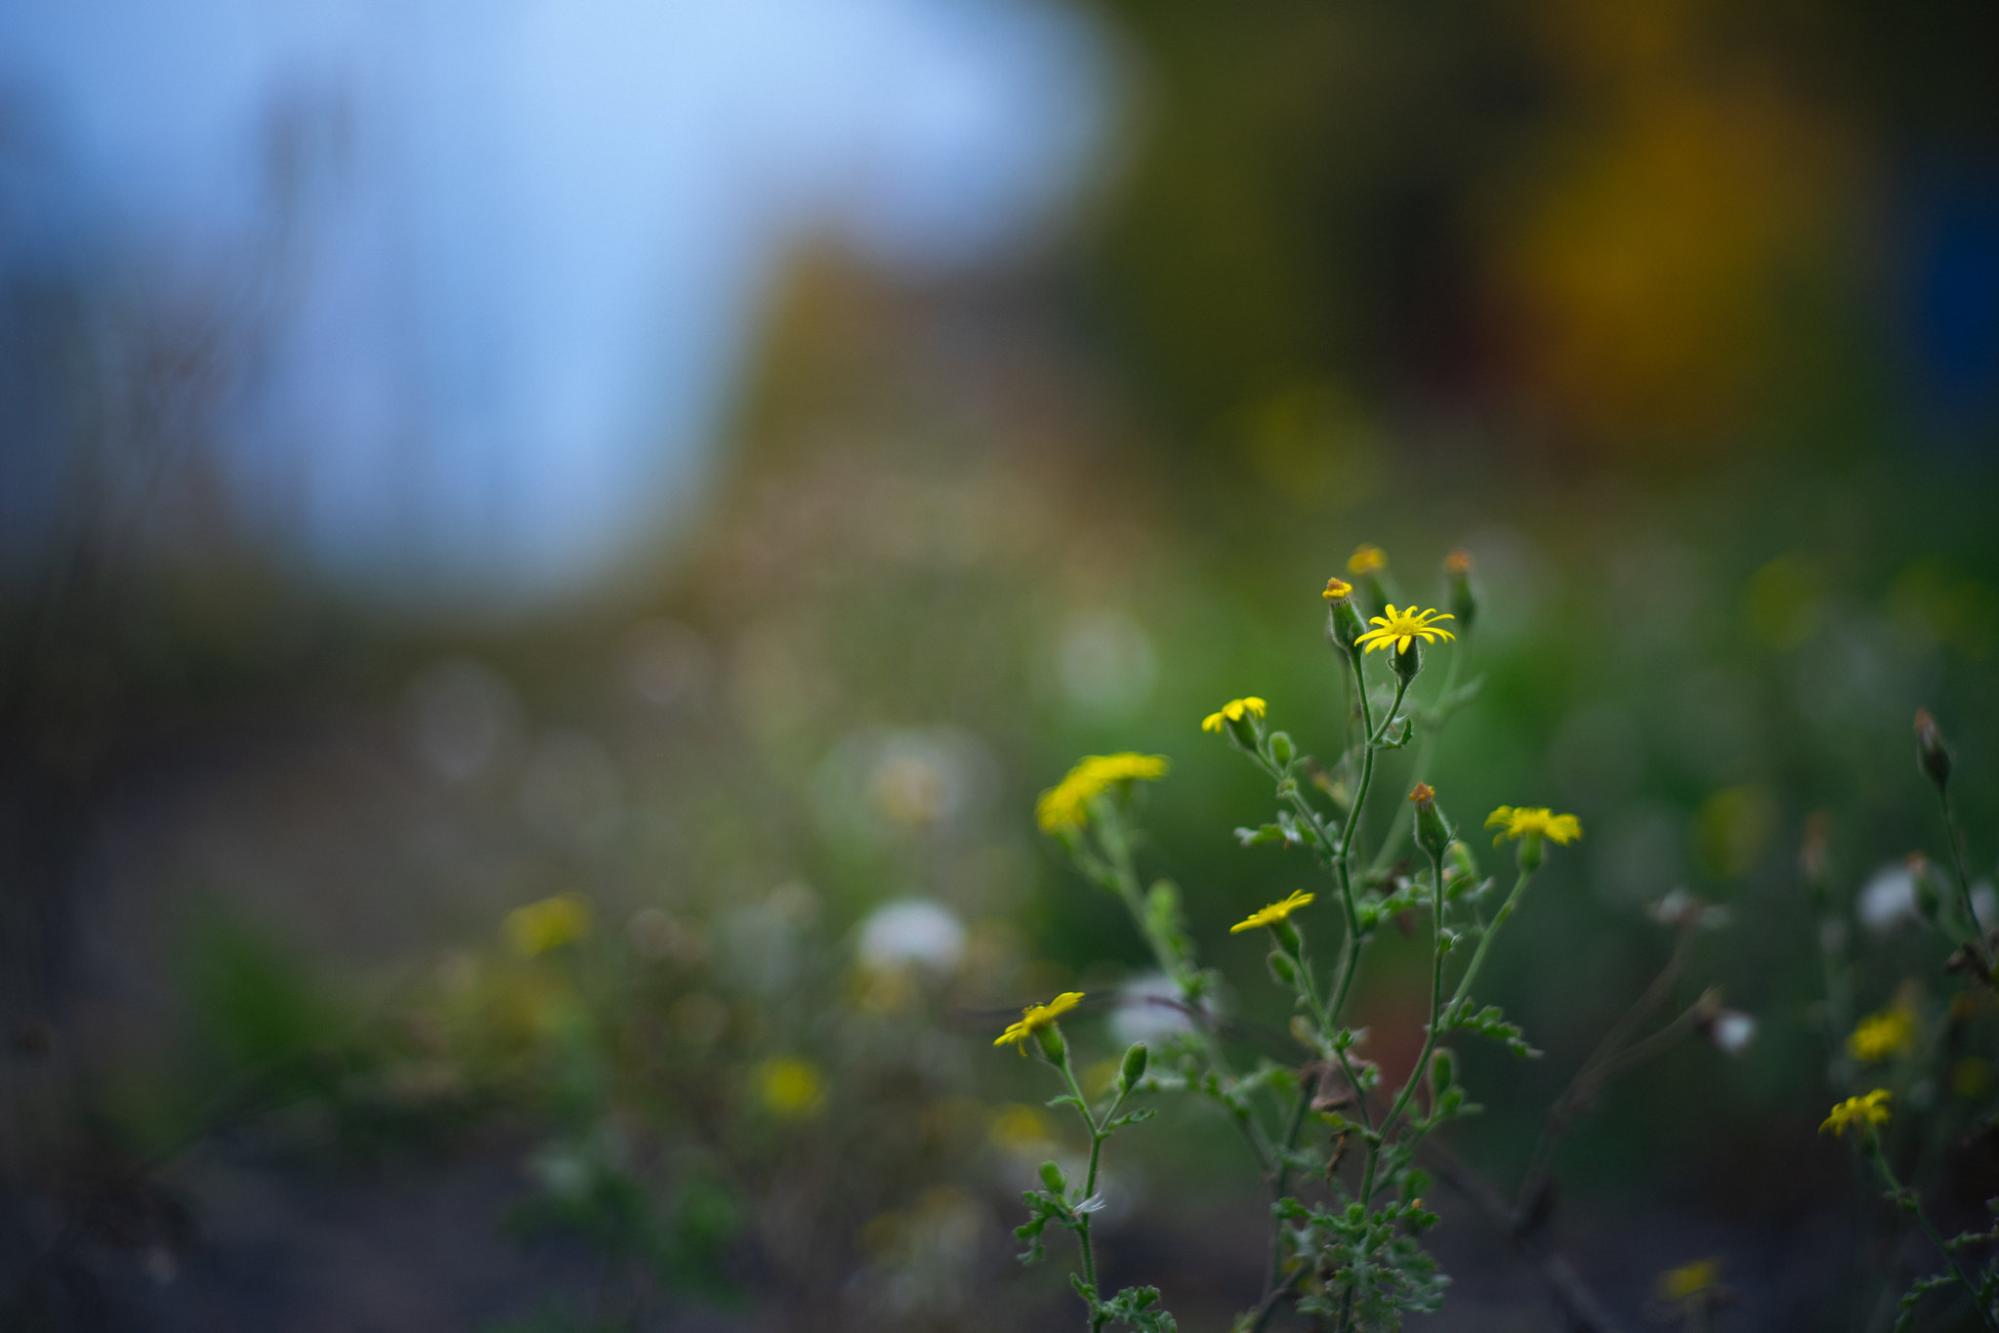 yellow flowers with background out of focus